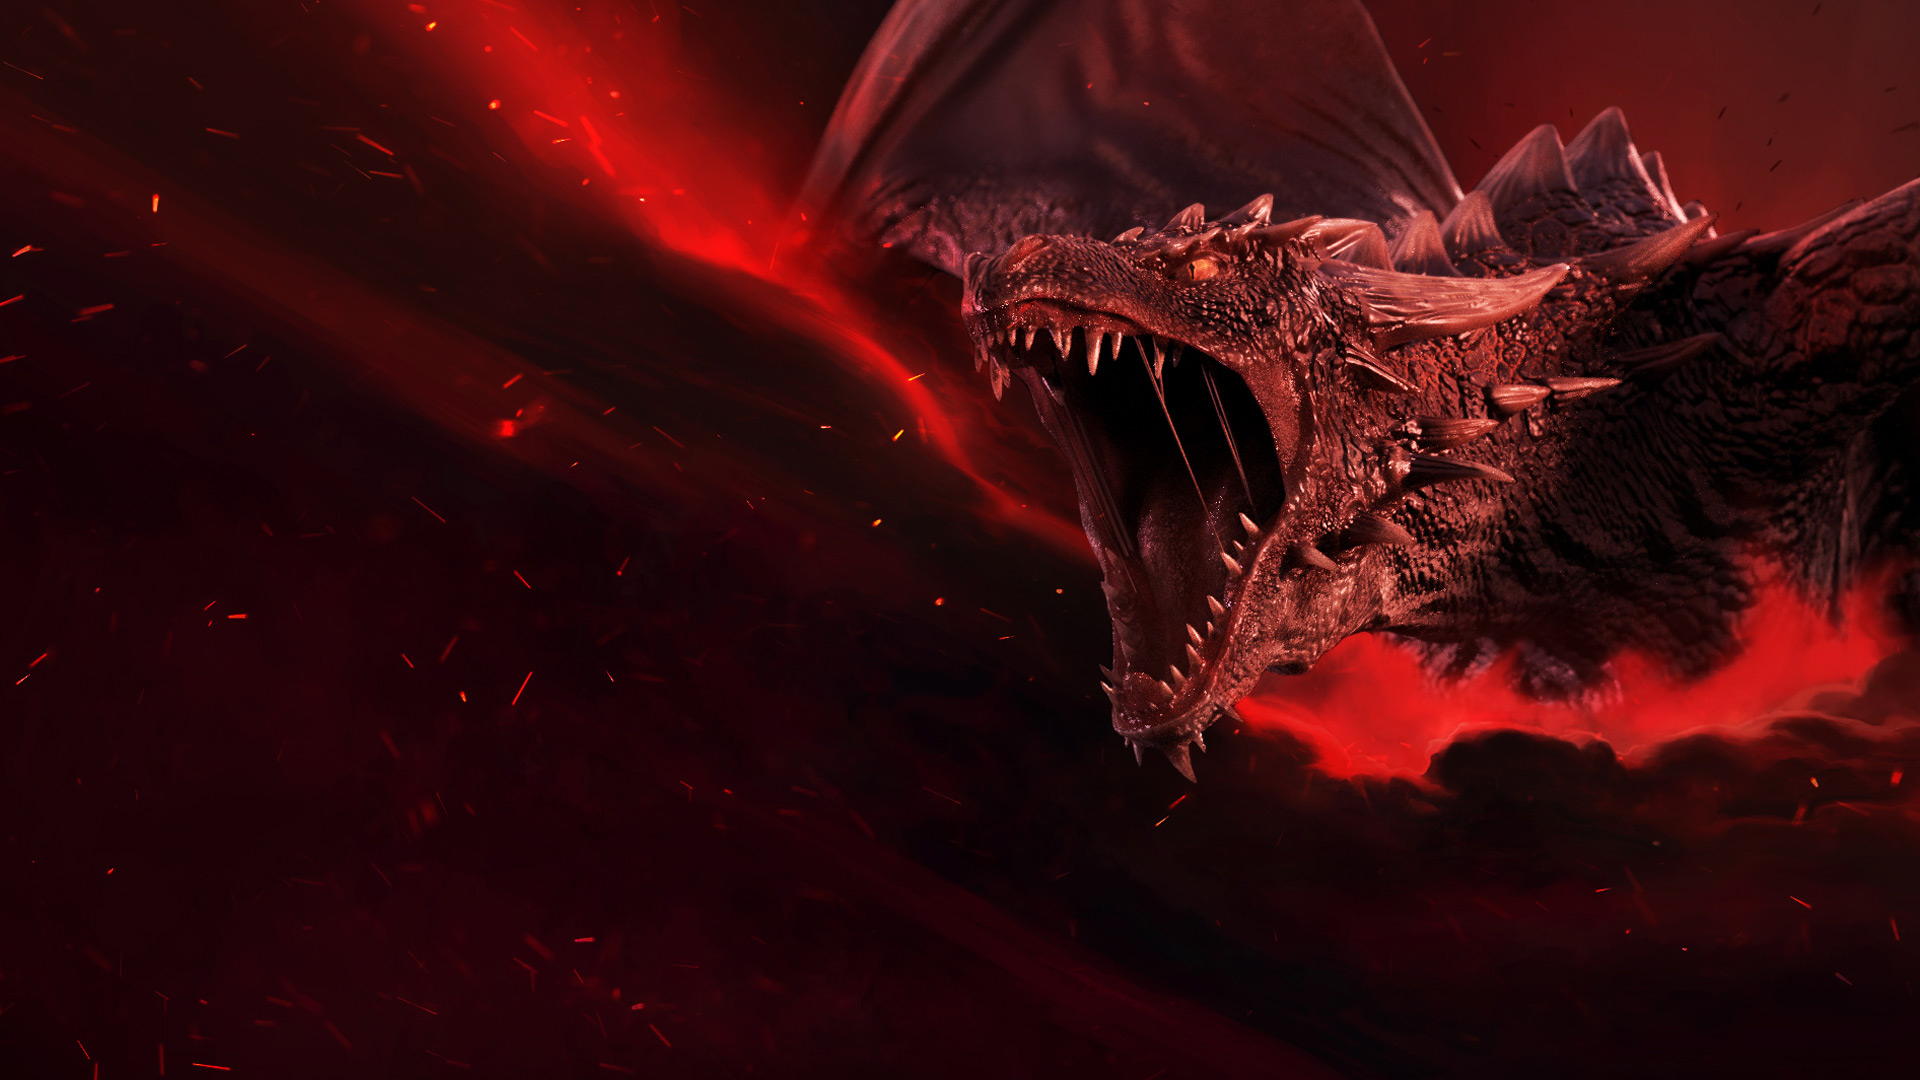 Red Dragon wallpaper by Xwalls - Download on ZEDGE™ | d974